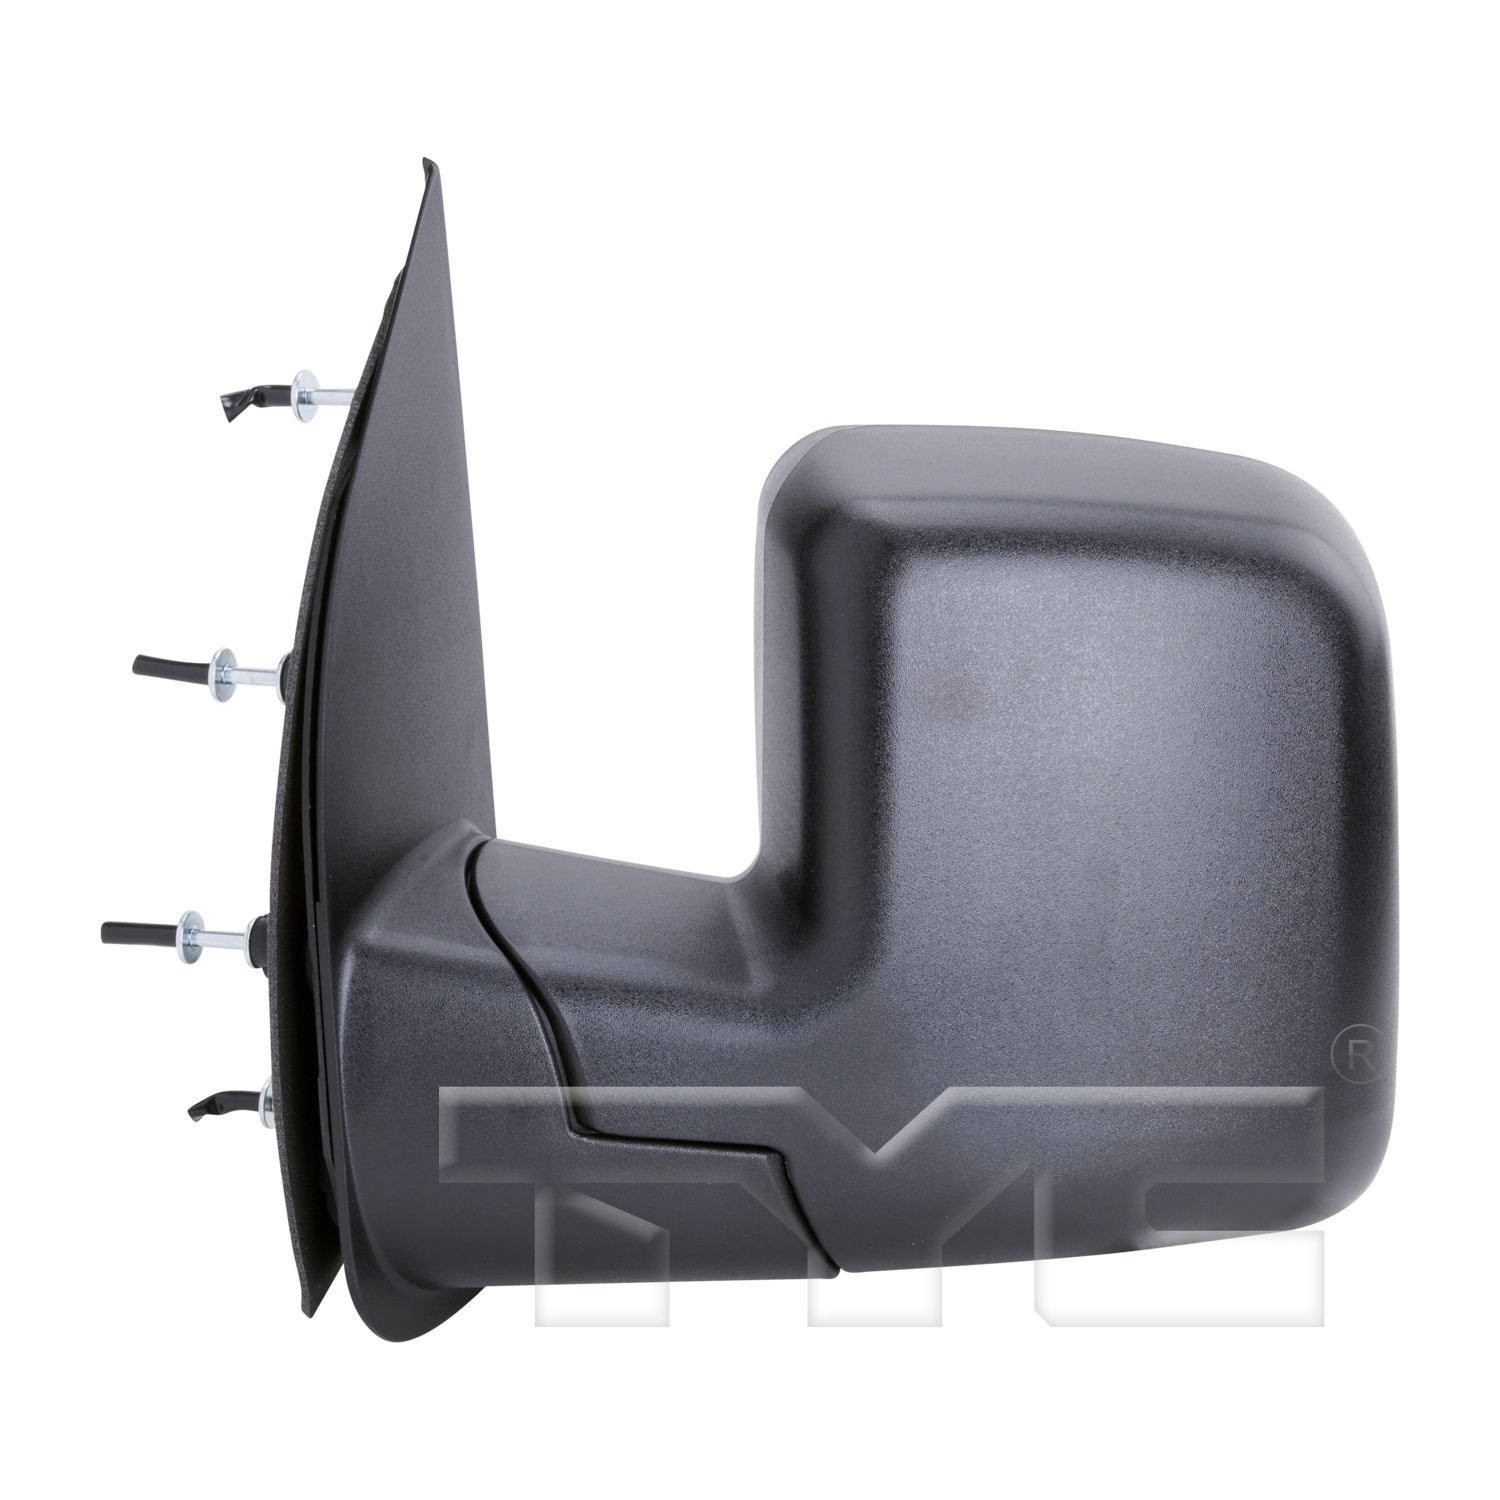 Aftermarket MIRRORS for FORD - E-350 SUPER DUTY, E-350 SUPER DUTY,02-07,LT Mirror outside rear view